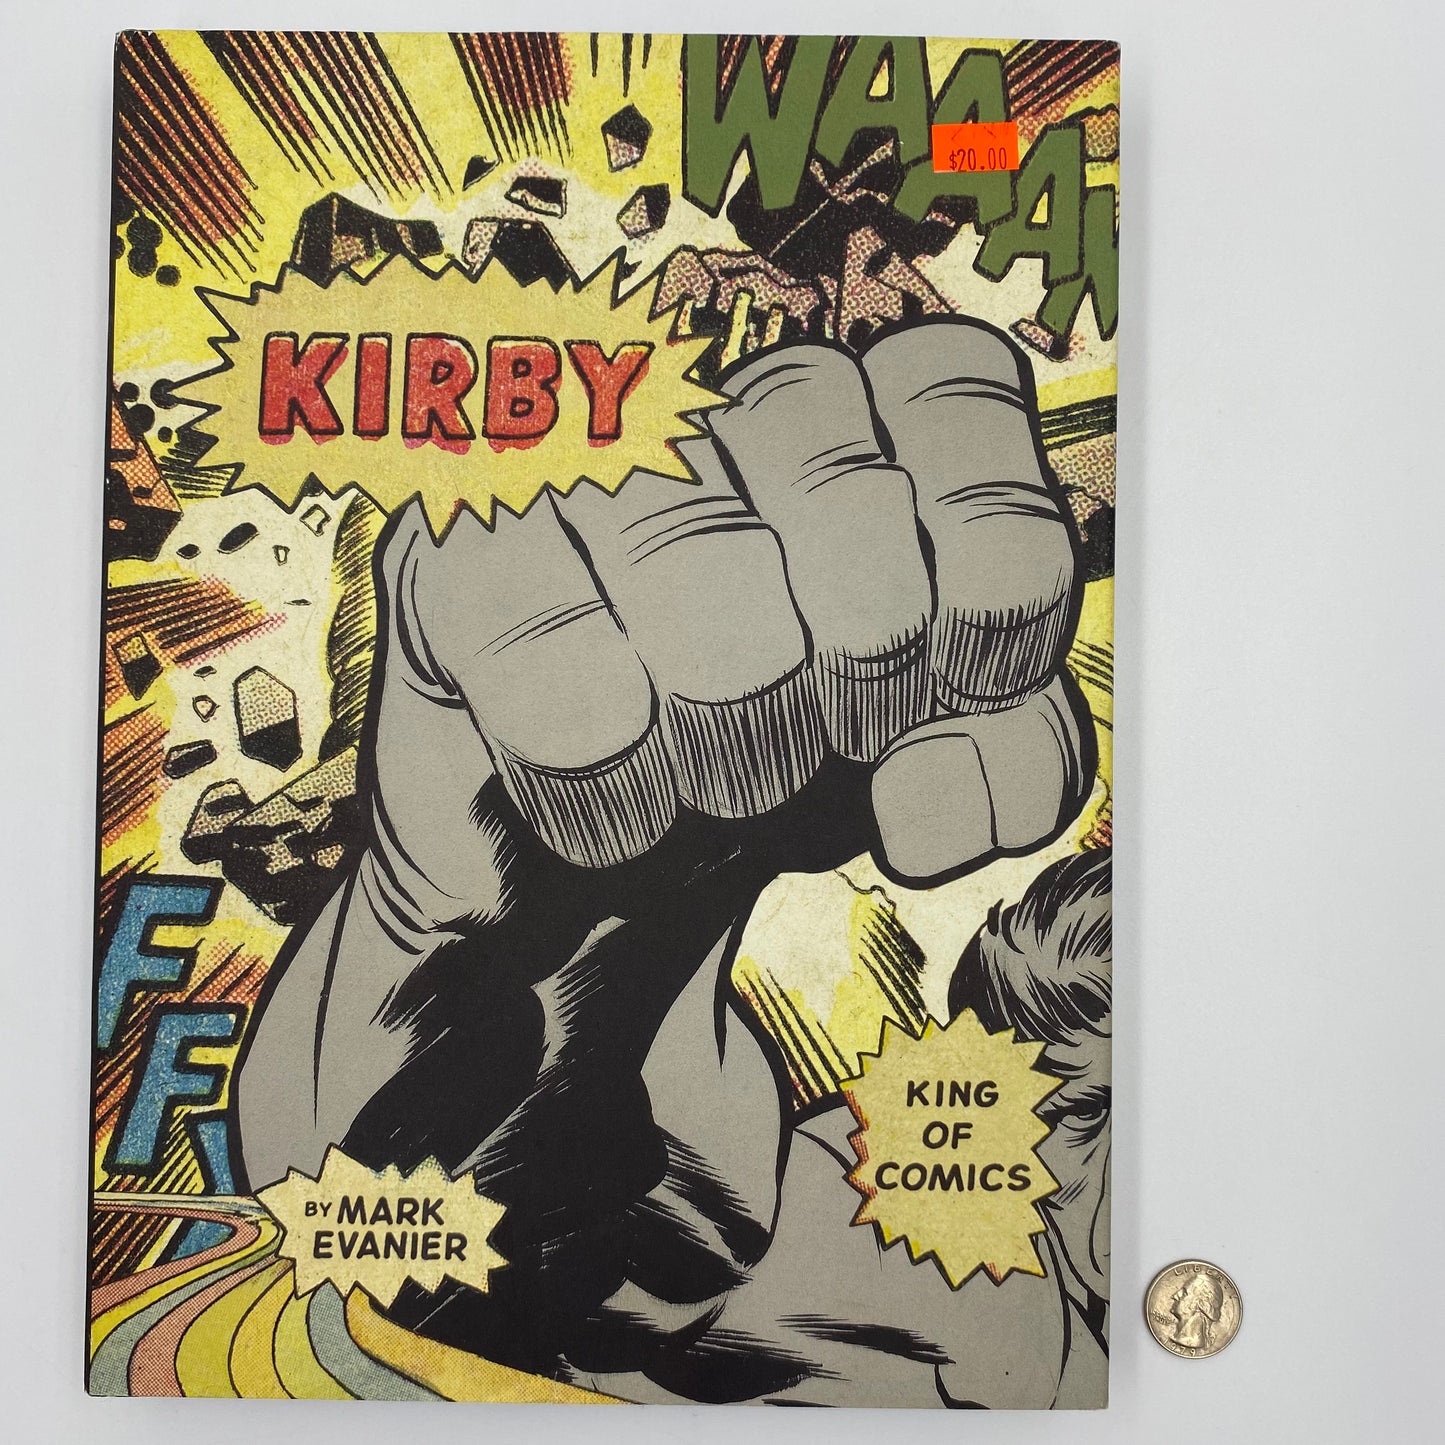 Kirby: King of Comics first edition hardcover (2008) Abrams